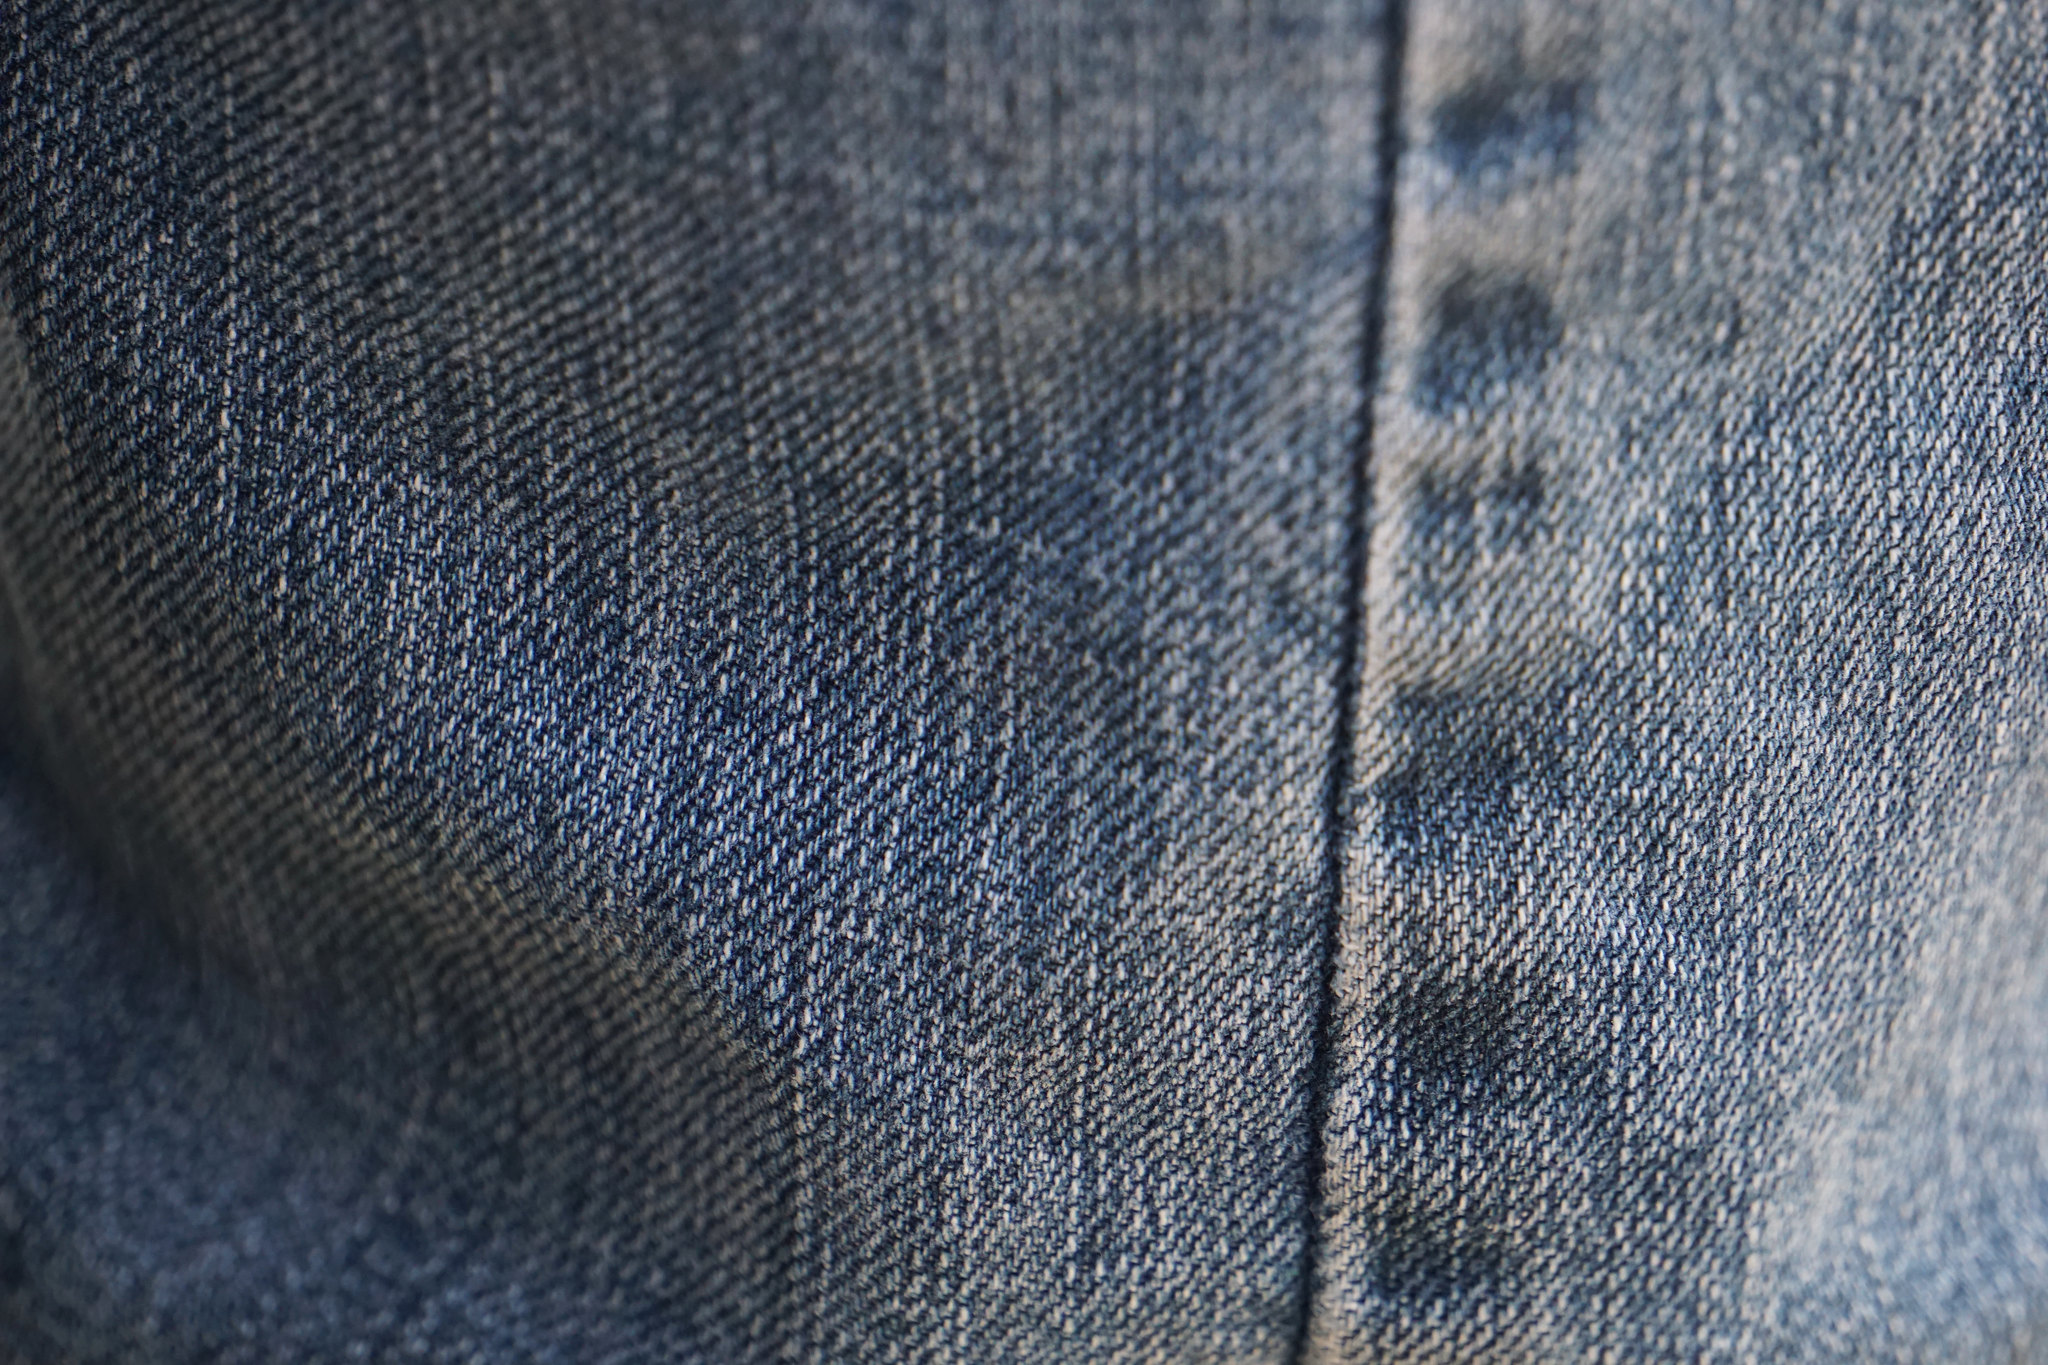 The wear patterns of your jeans aren’t good forensic evidence | Ars ...